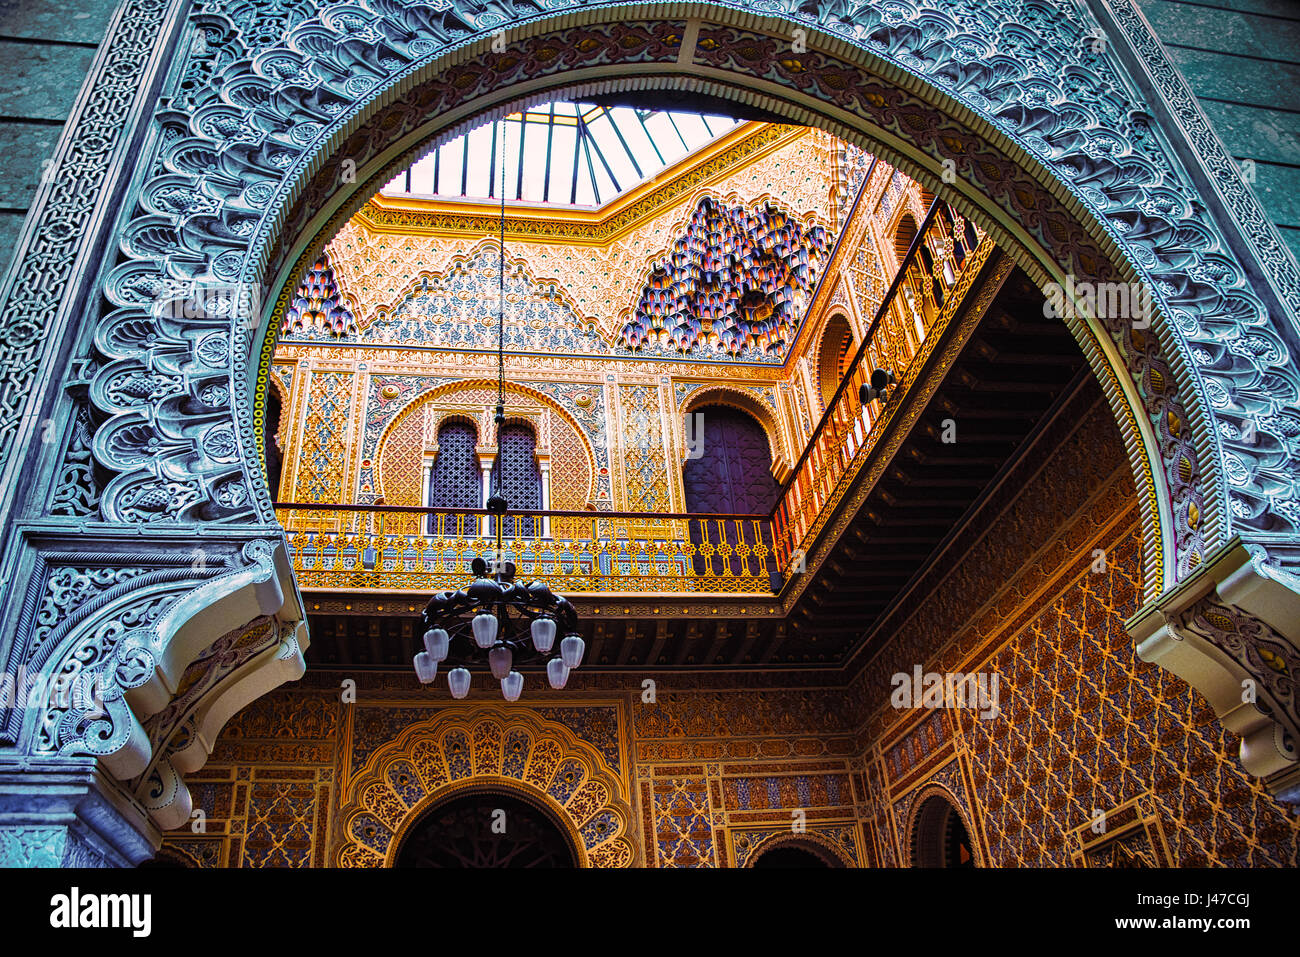 A shot from the 'Real Casino' in Murcia, a gentleman's club that opened in 1847 and boasts striking Moorish influences. By Mark Higham Stock Photo